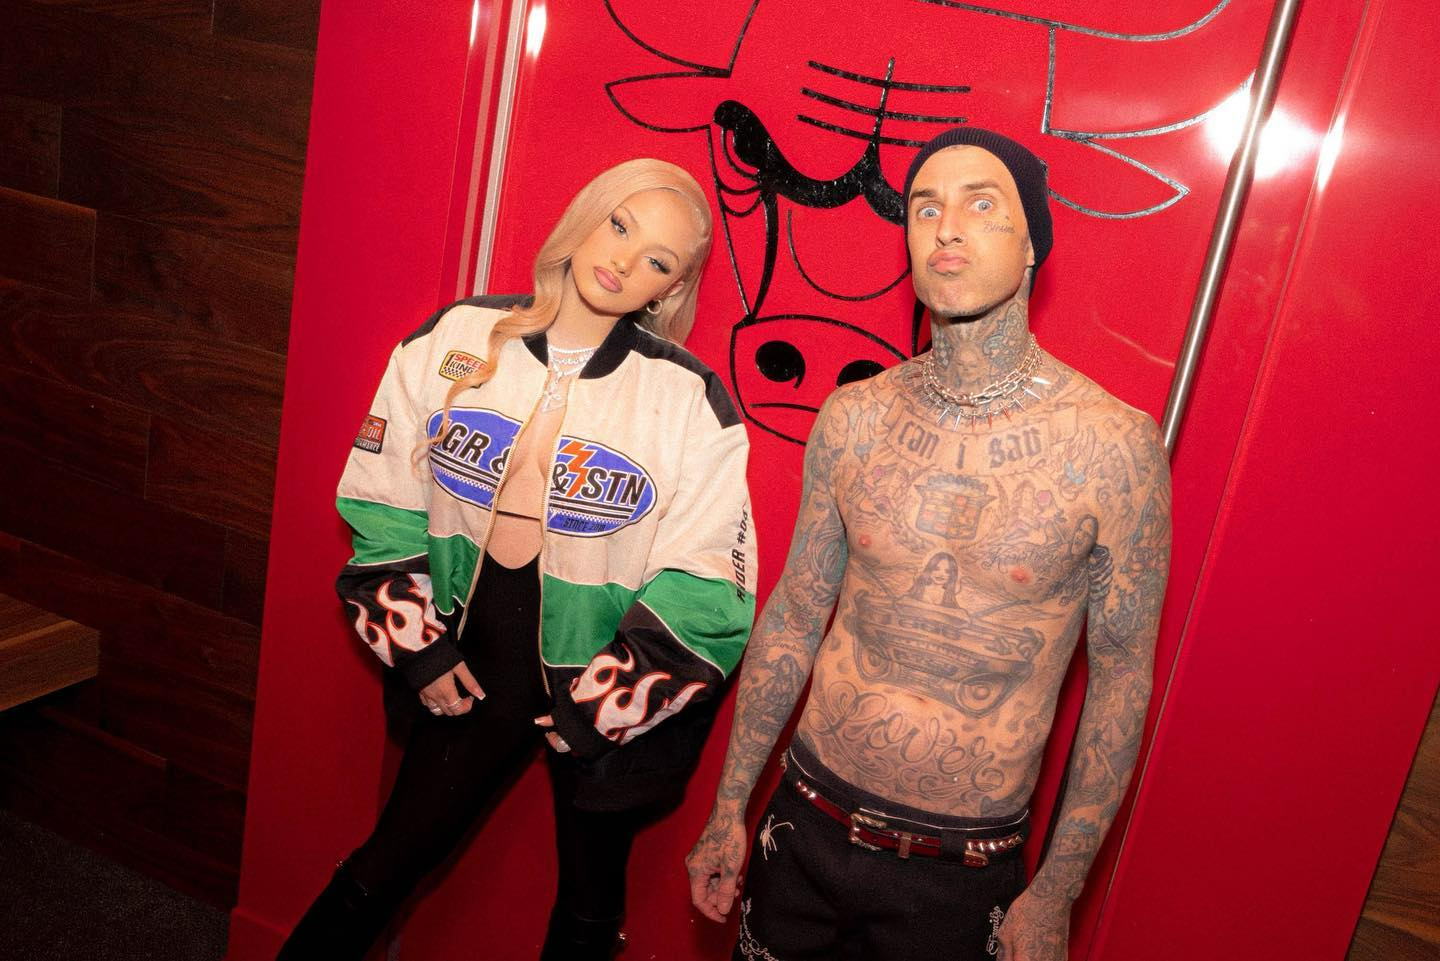 Fans have repeatedly questioned Travis Barker's parenting skills and wondered why he allows his 17-year-old daughter to wear revealing outfits